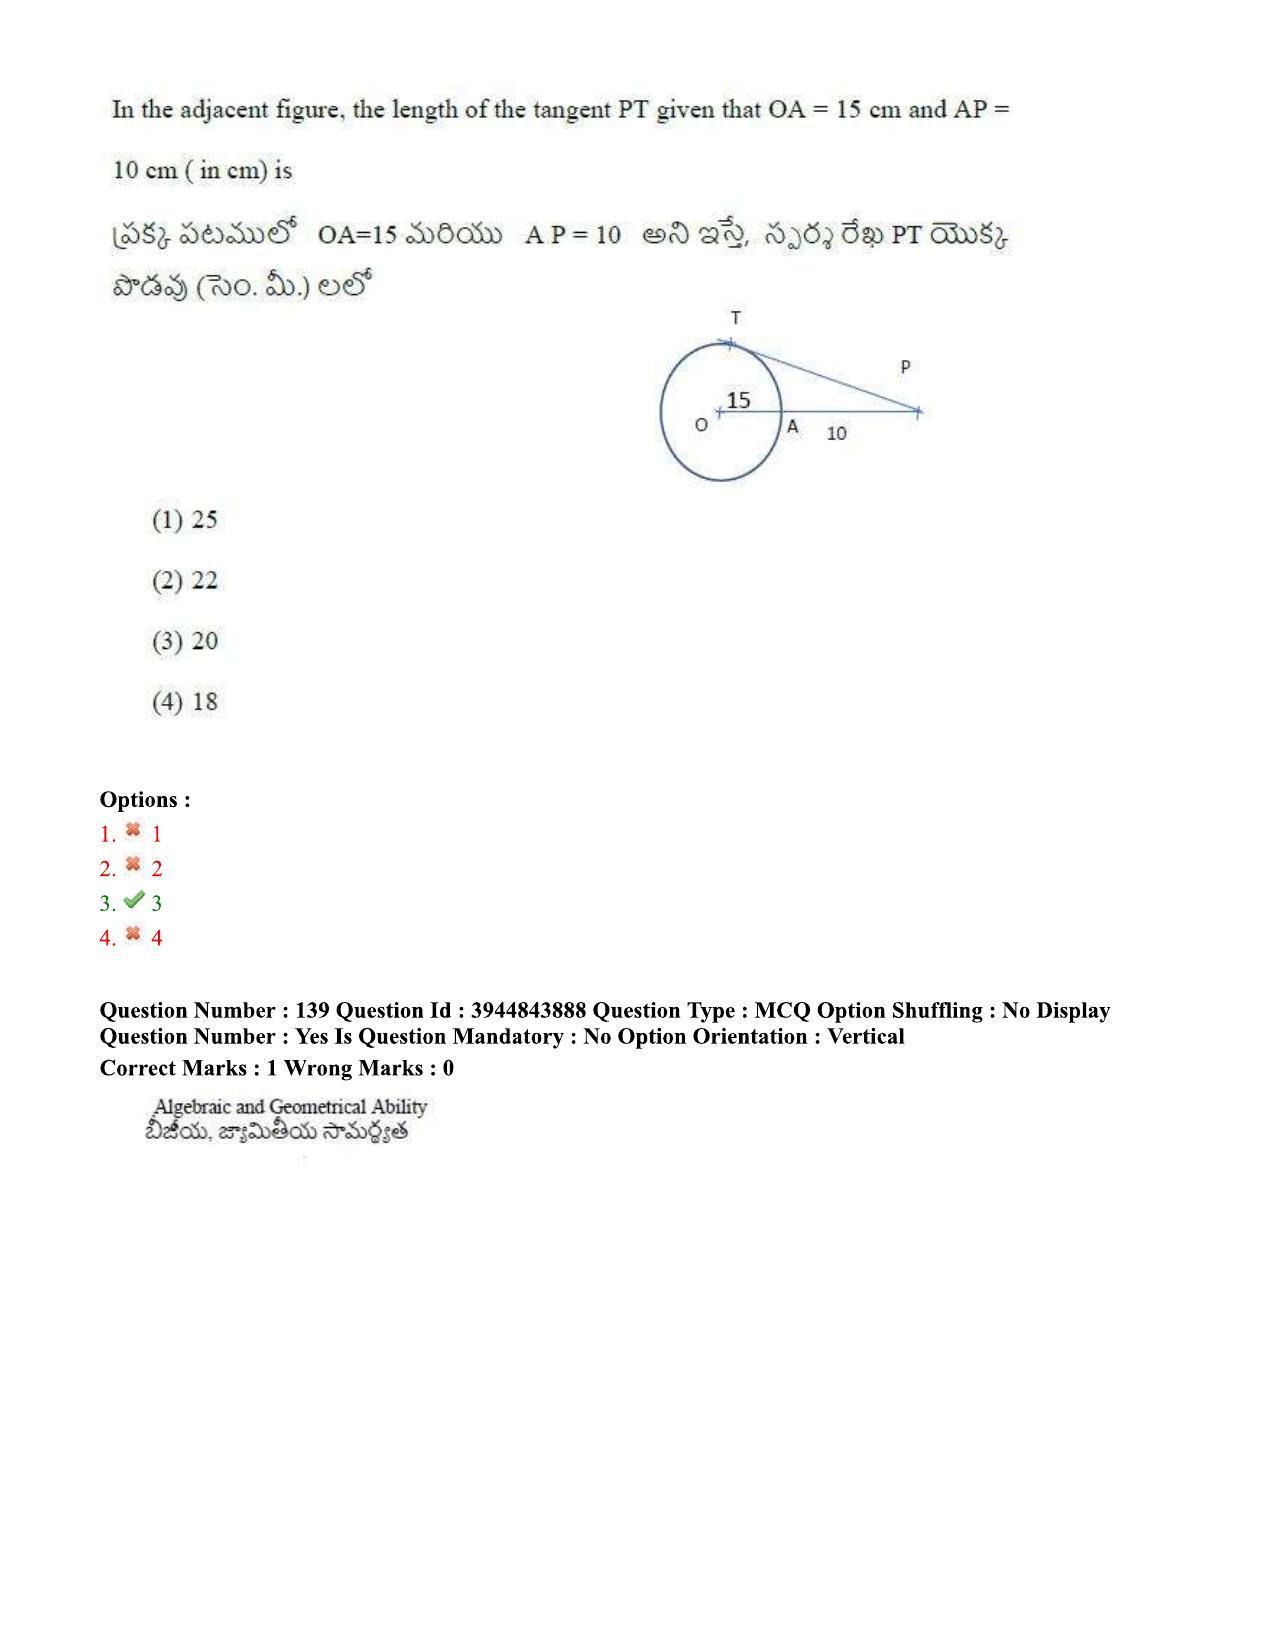 TS ICET 2020 Question Paper 1 - Oct 1, 2020	 - Page 108